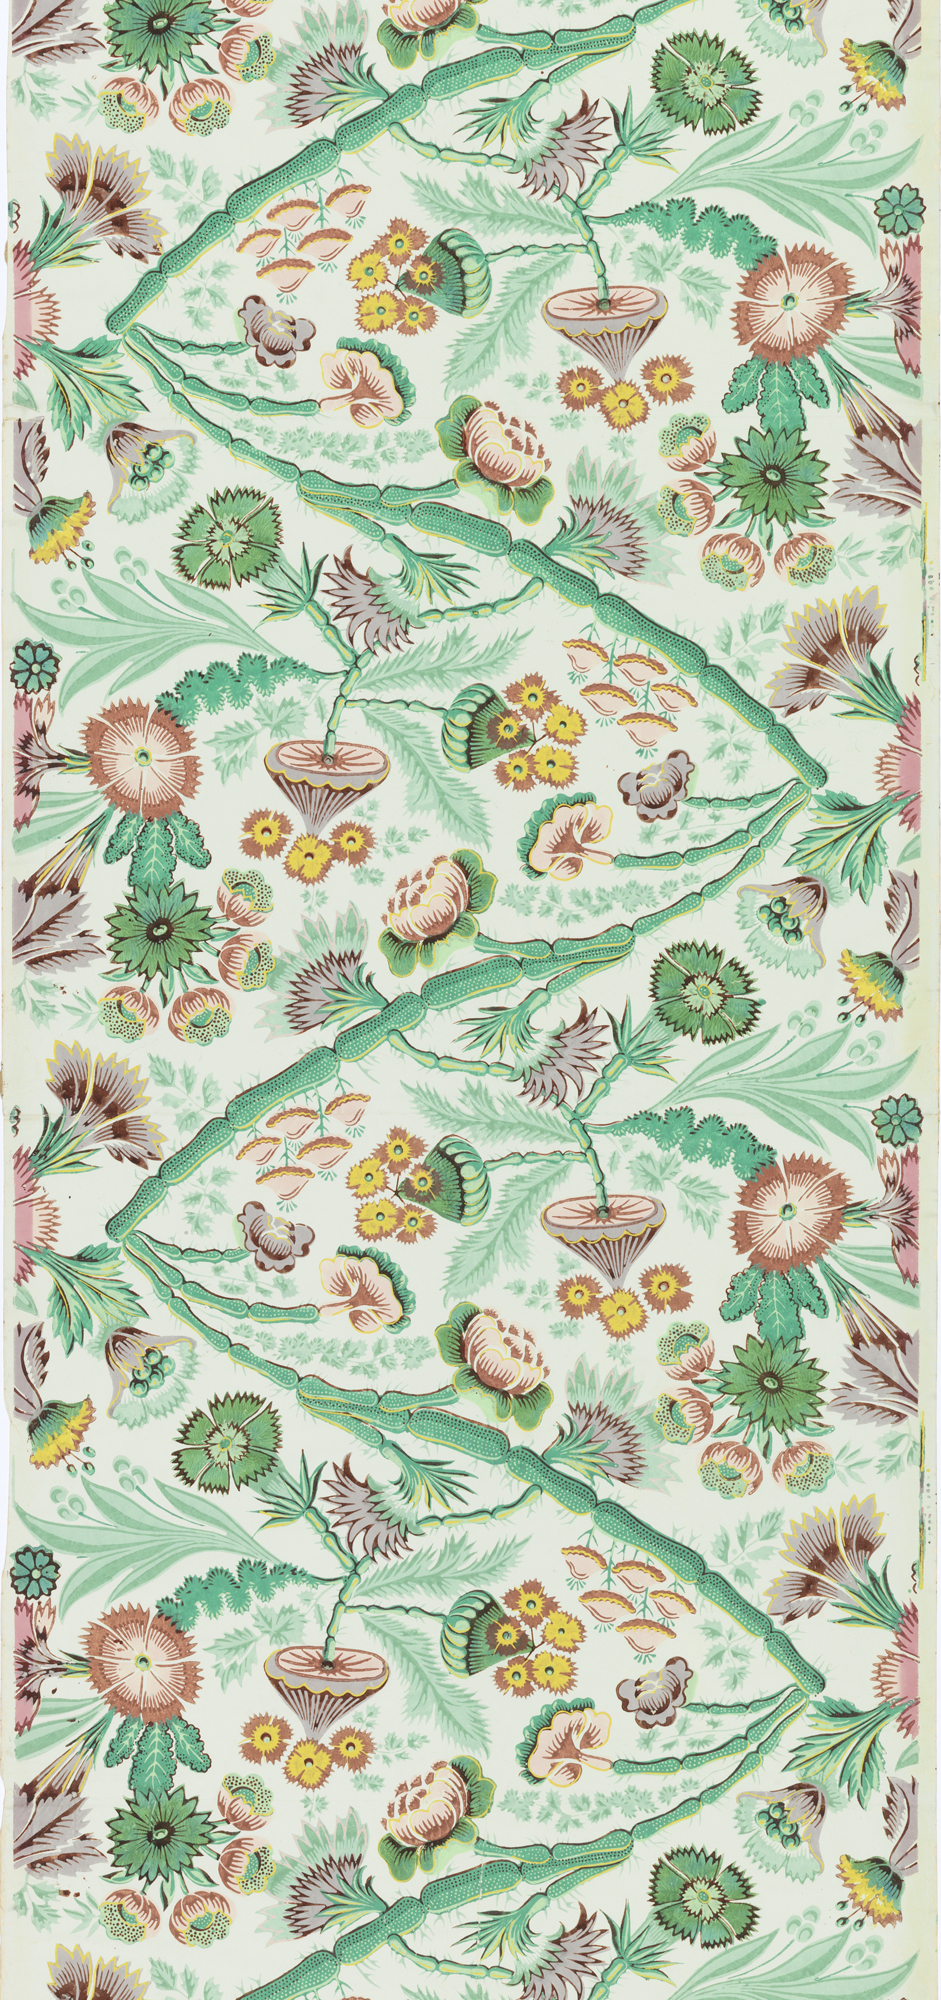 Roll of paper printed in a repeating design of flowers and foliage in the style of Pillement. Roll formed of joined sheets.